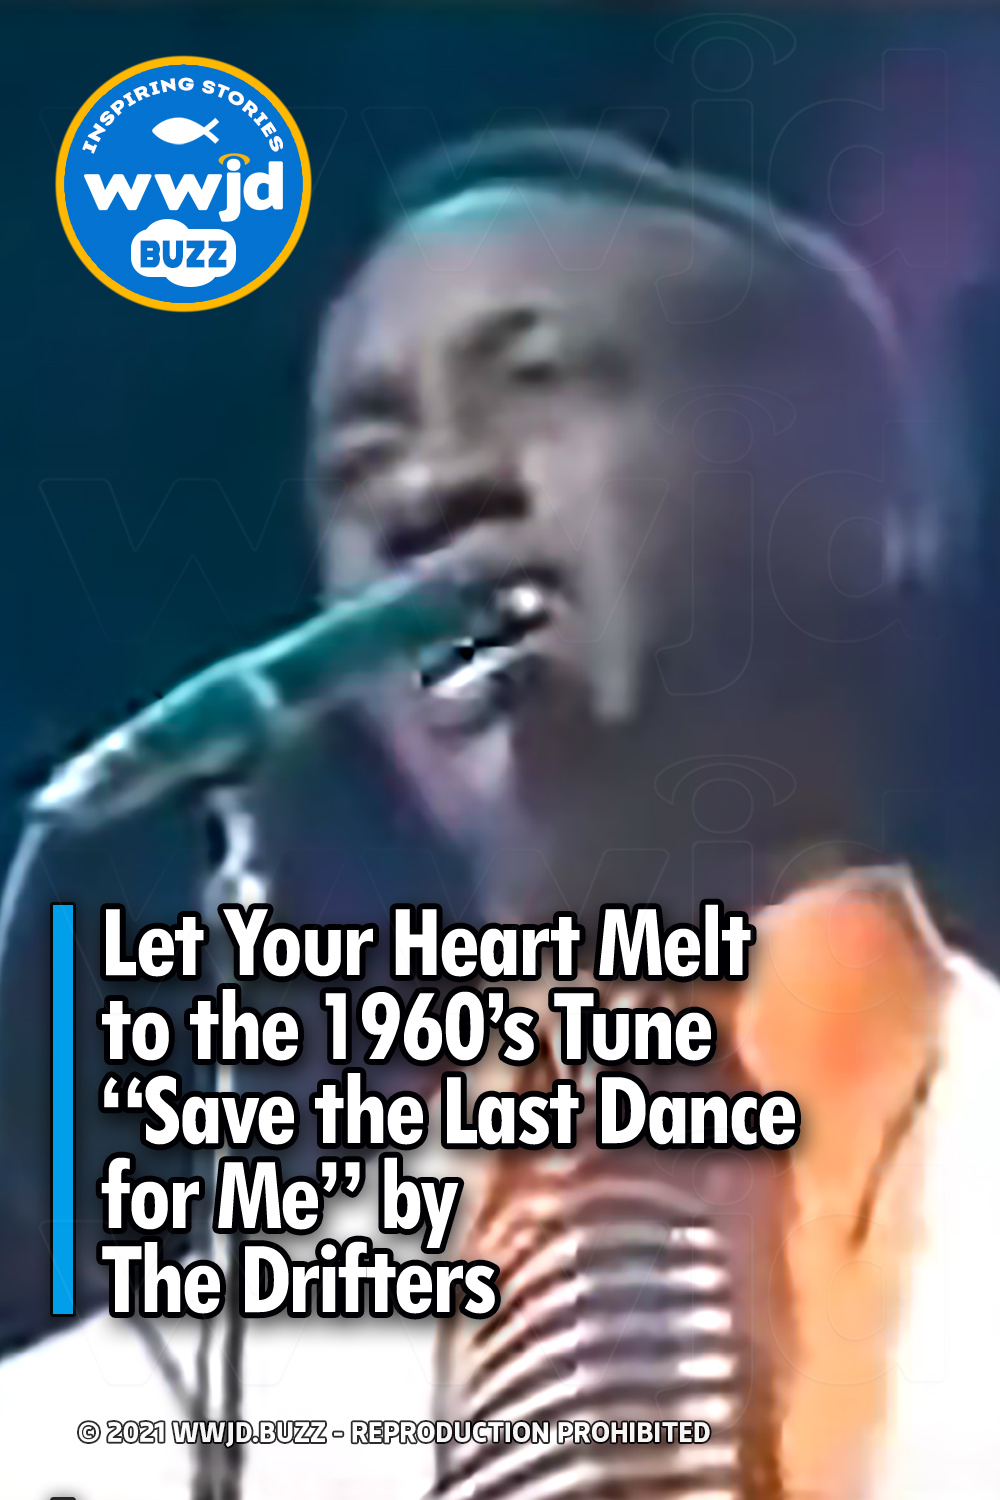 Let Your Heart Melt to the 1960’s Tune “Save the Last Dance for Me” by The Drifters